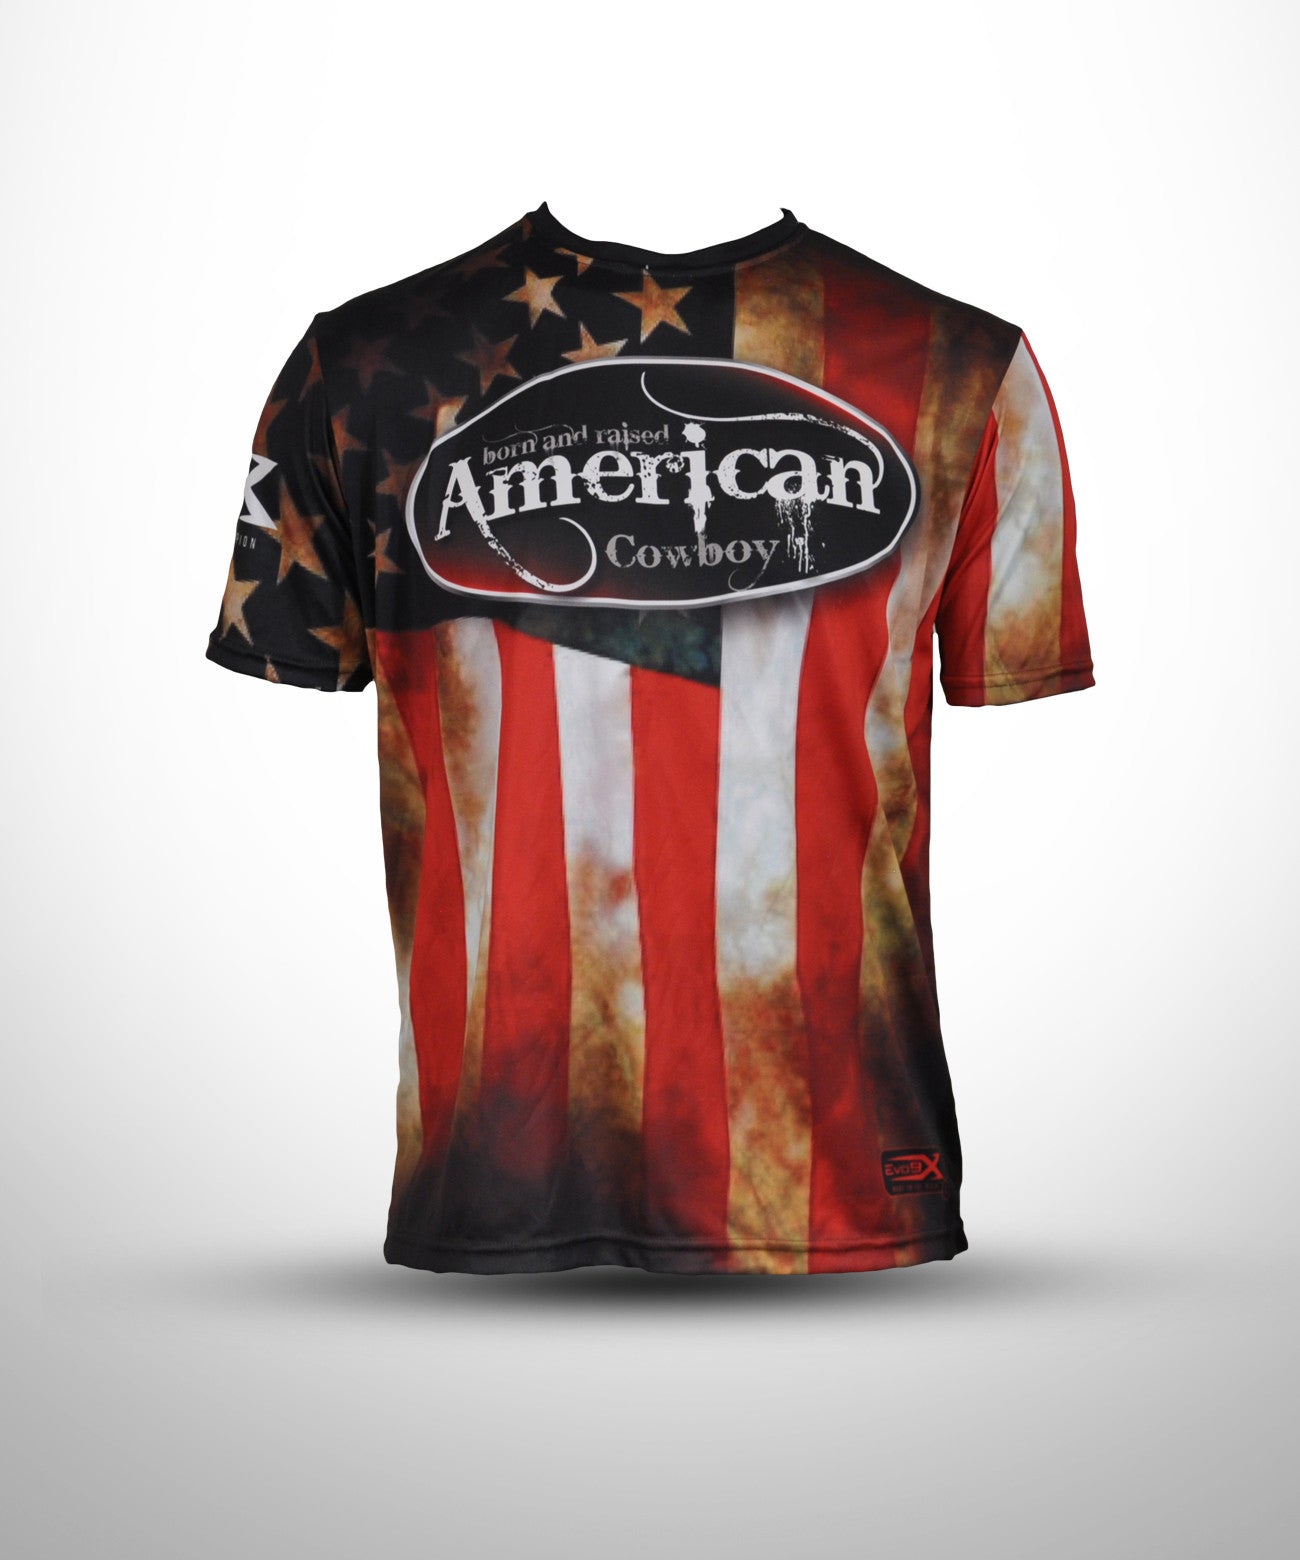 Full Dye sublimated Jersey - Evo9x Store